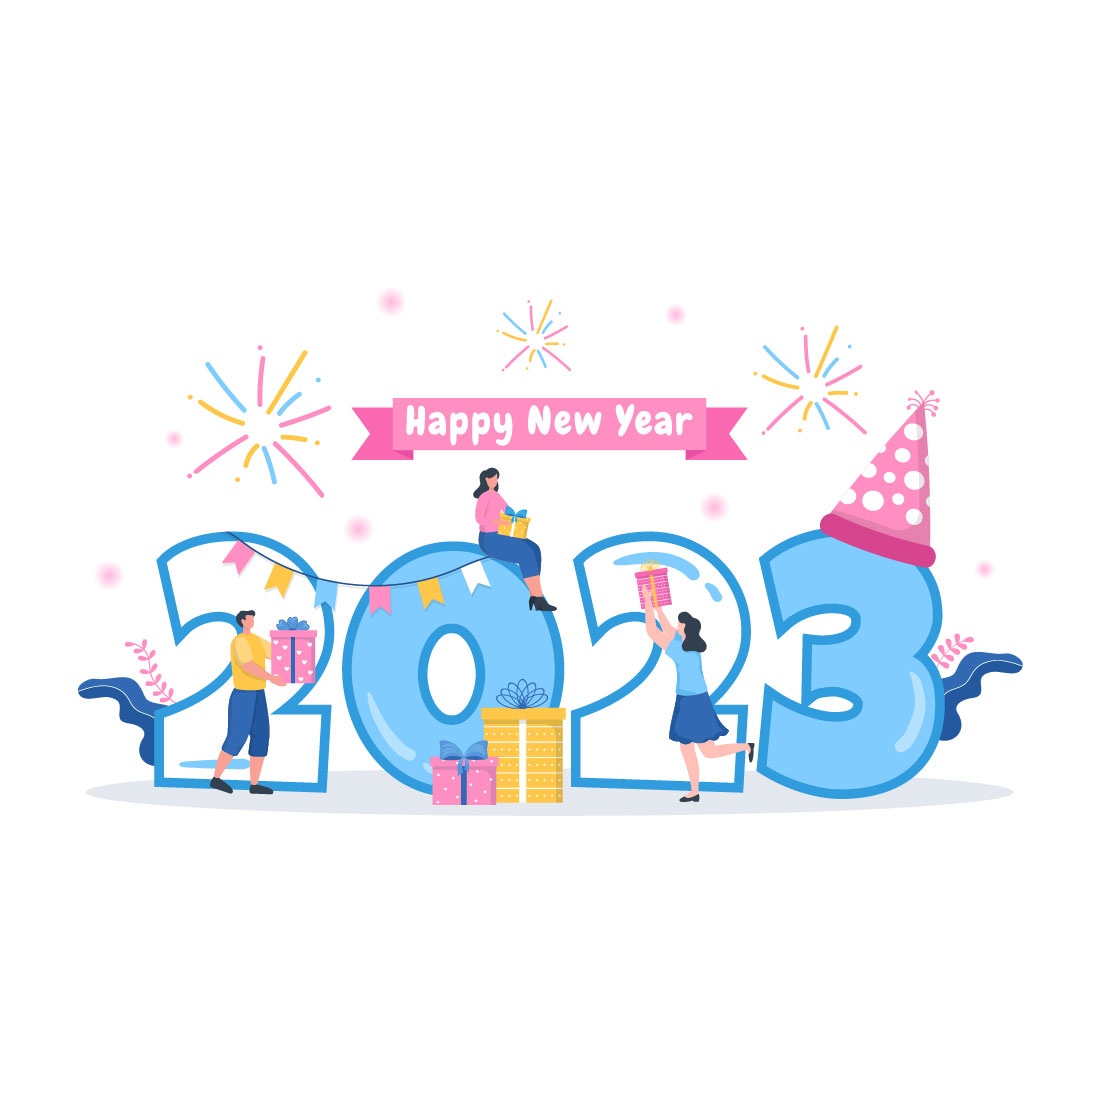 12 Happy New Year 2023 Illustration preview image.